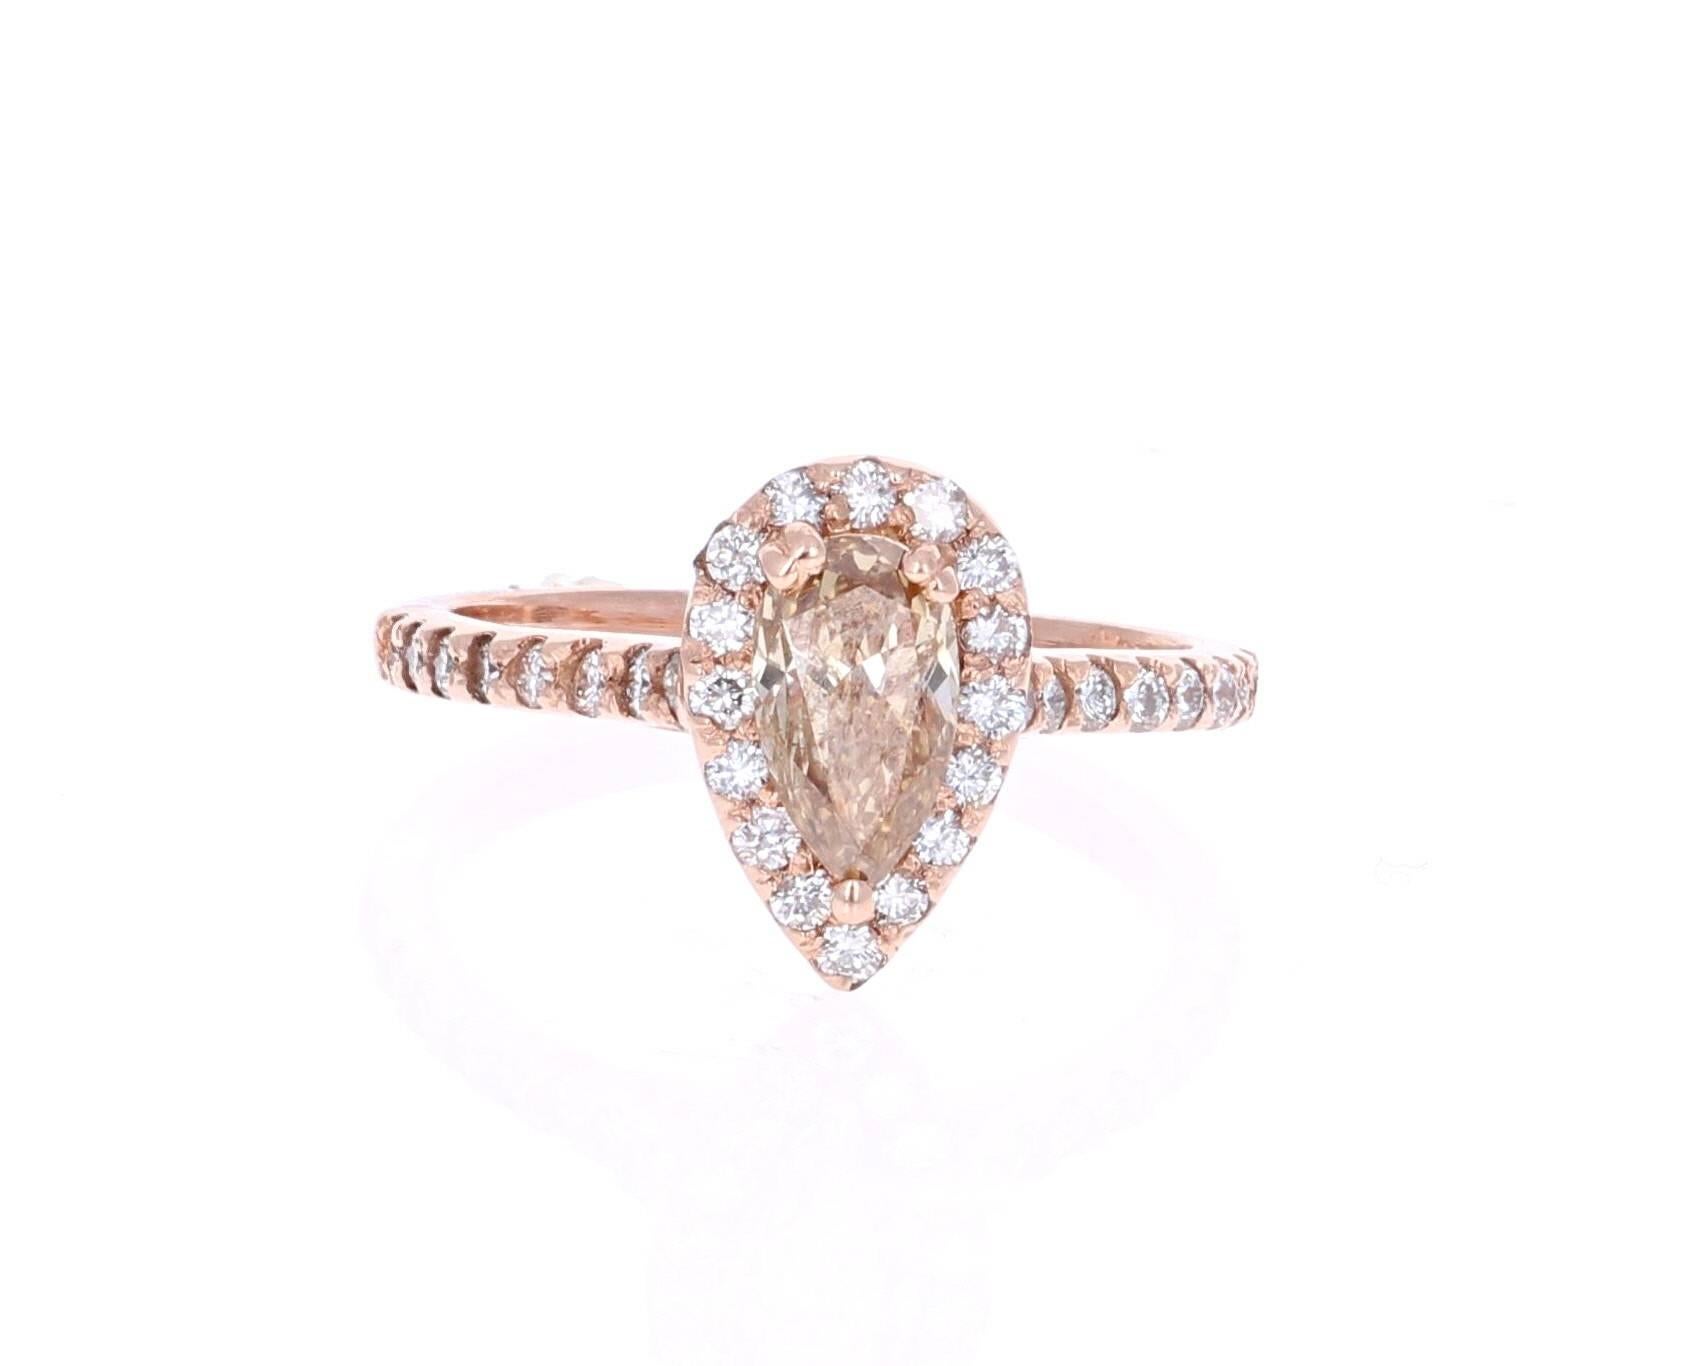 A gorgeous 1.55 Carat Fancy Pear Cut Diamond Engagement Ring in 14K Rose Gold that will leave her breathless! 

The center stone is a fancy colored Champagne Pear Cut Diamond weighing 1.02 carats.  It is surrounded by a halo of 32 Round Cut diamonds